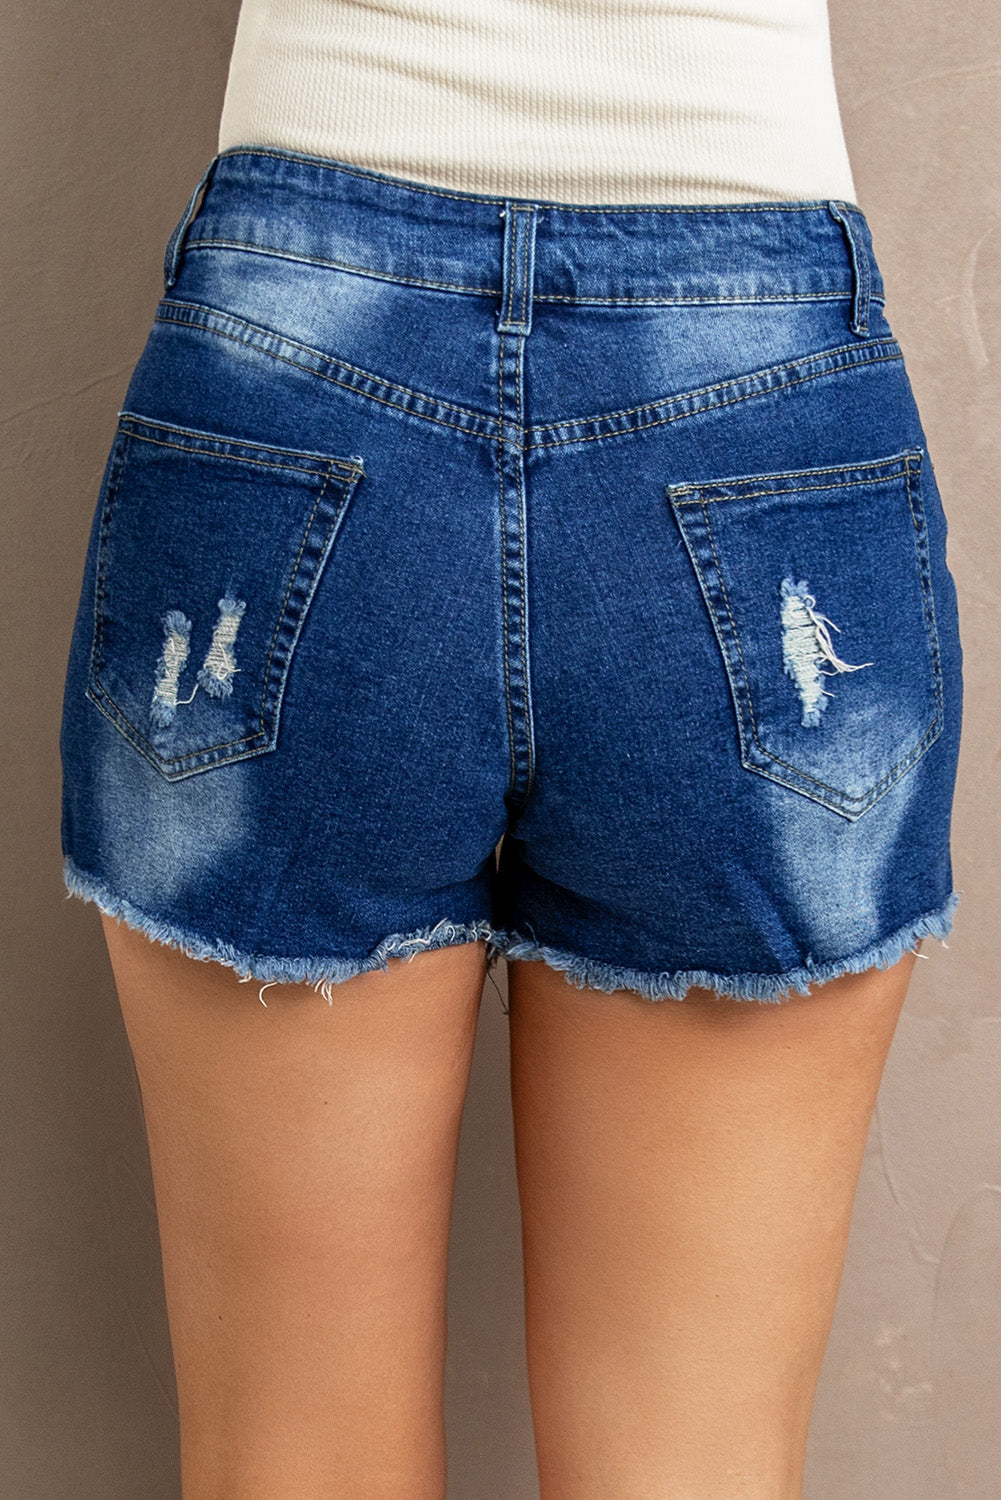 Spliced Lace Distressed Denim Shorts - Women’s Clothing & Accessories - Shorts - 2 - 2024